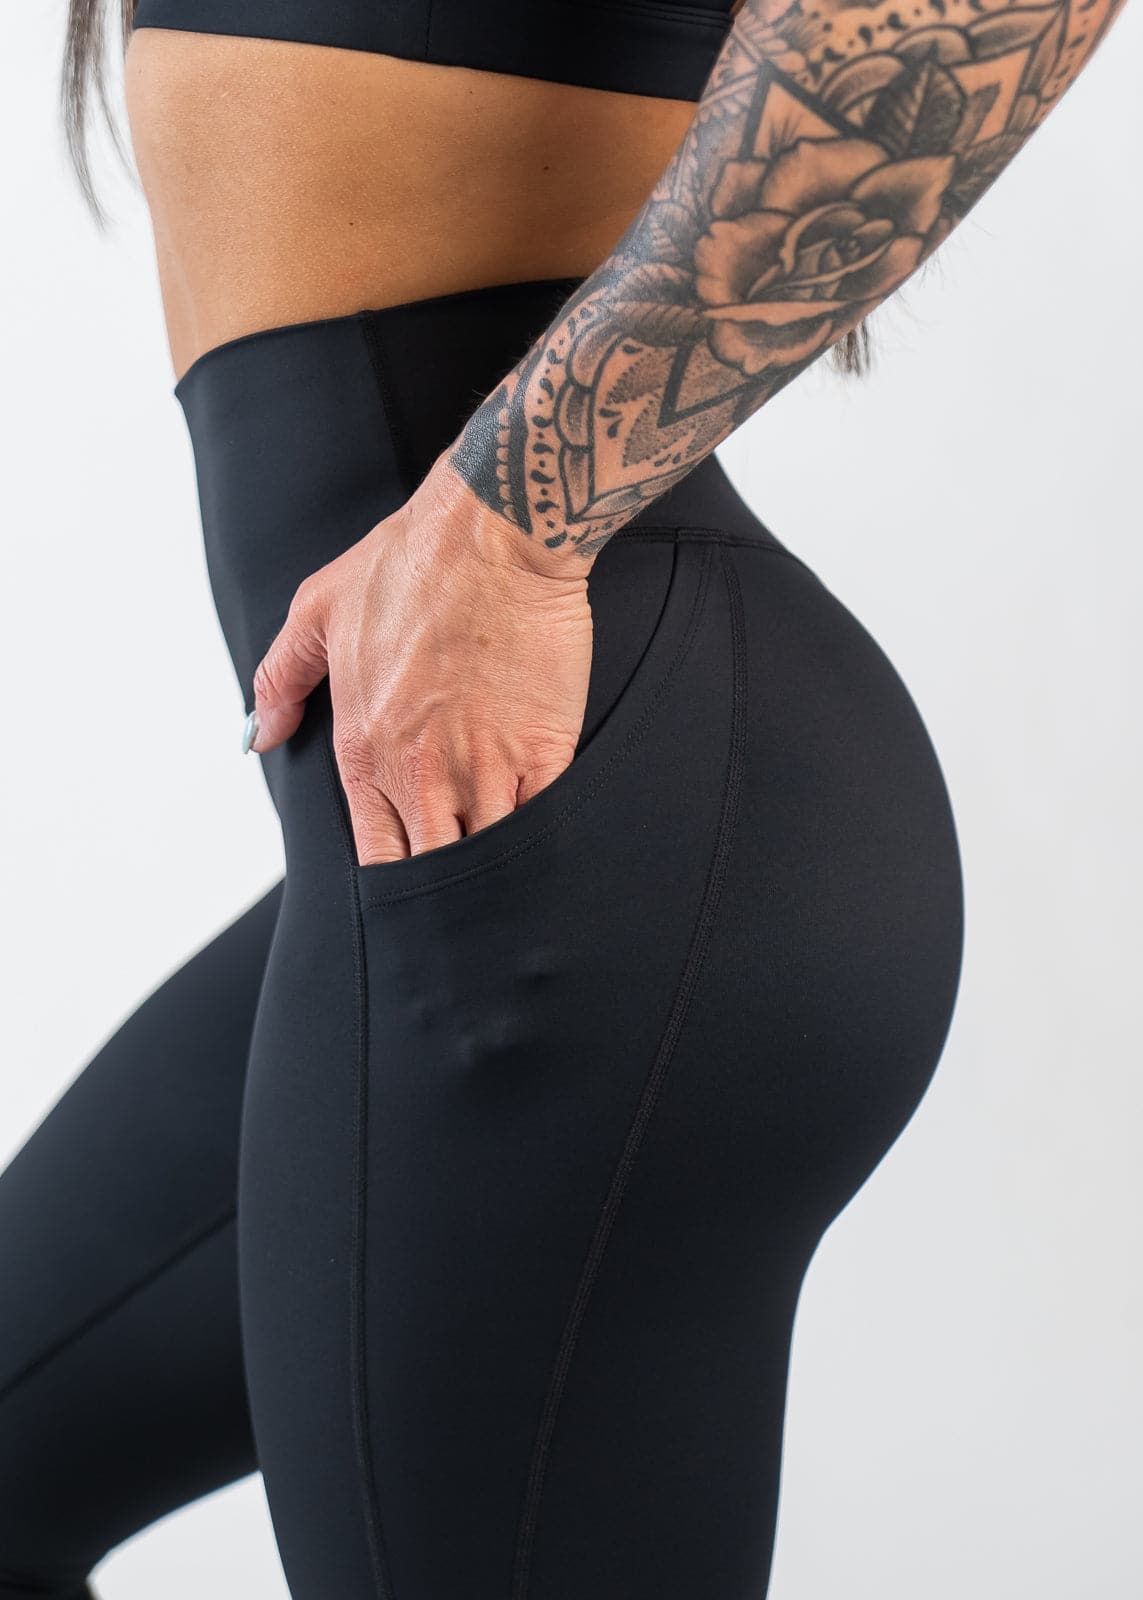 Chest to Thigh Side View with Hand in Pocket Wearing Empowered Leggings With Pockets | Black